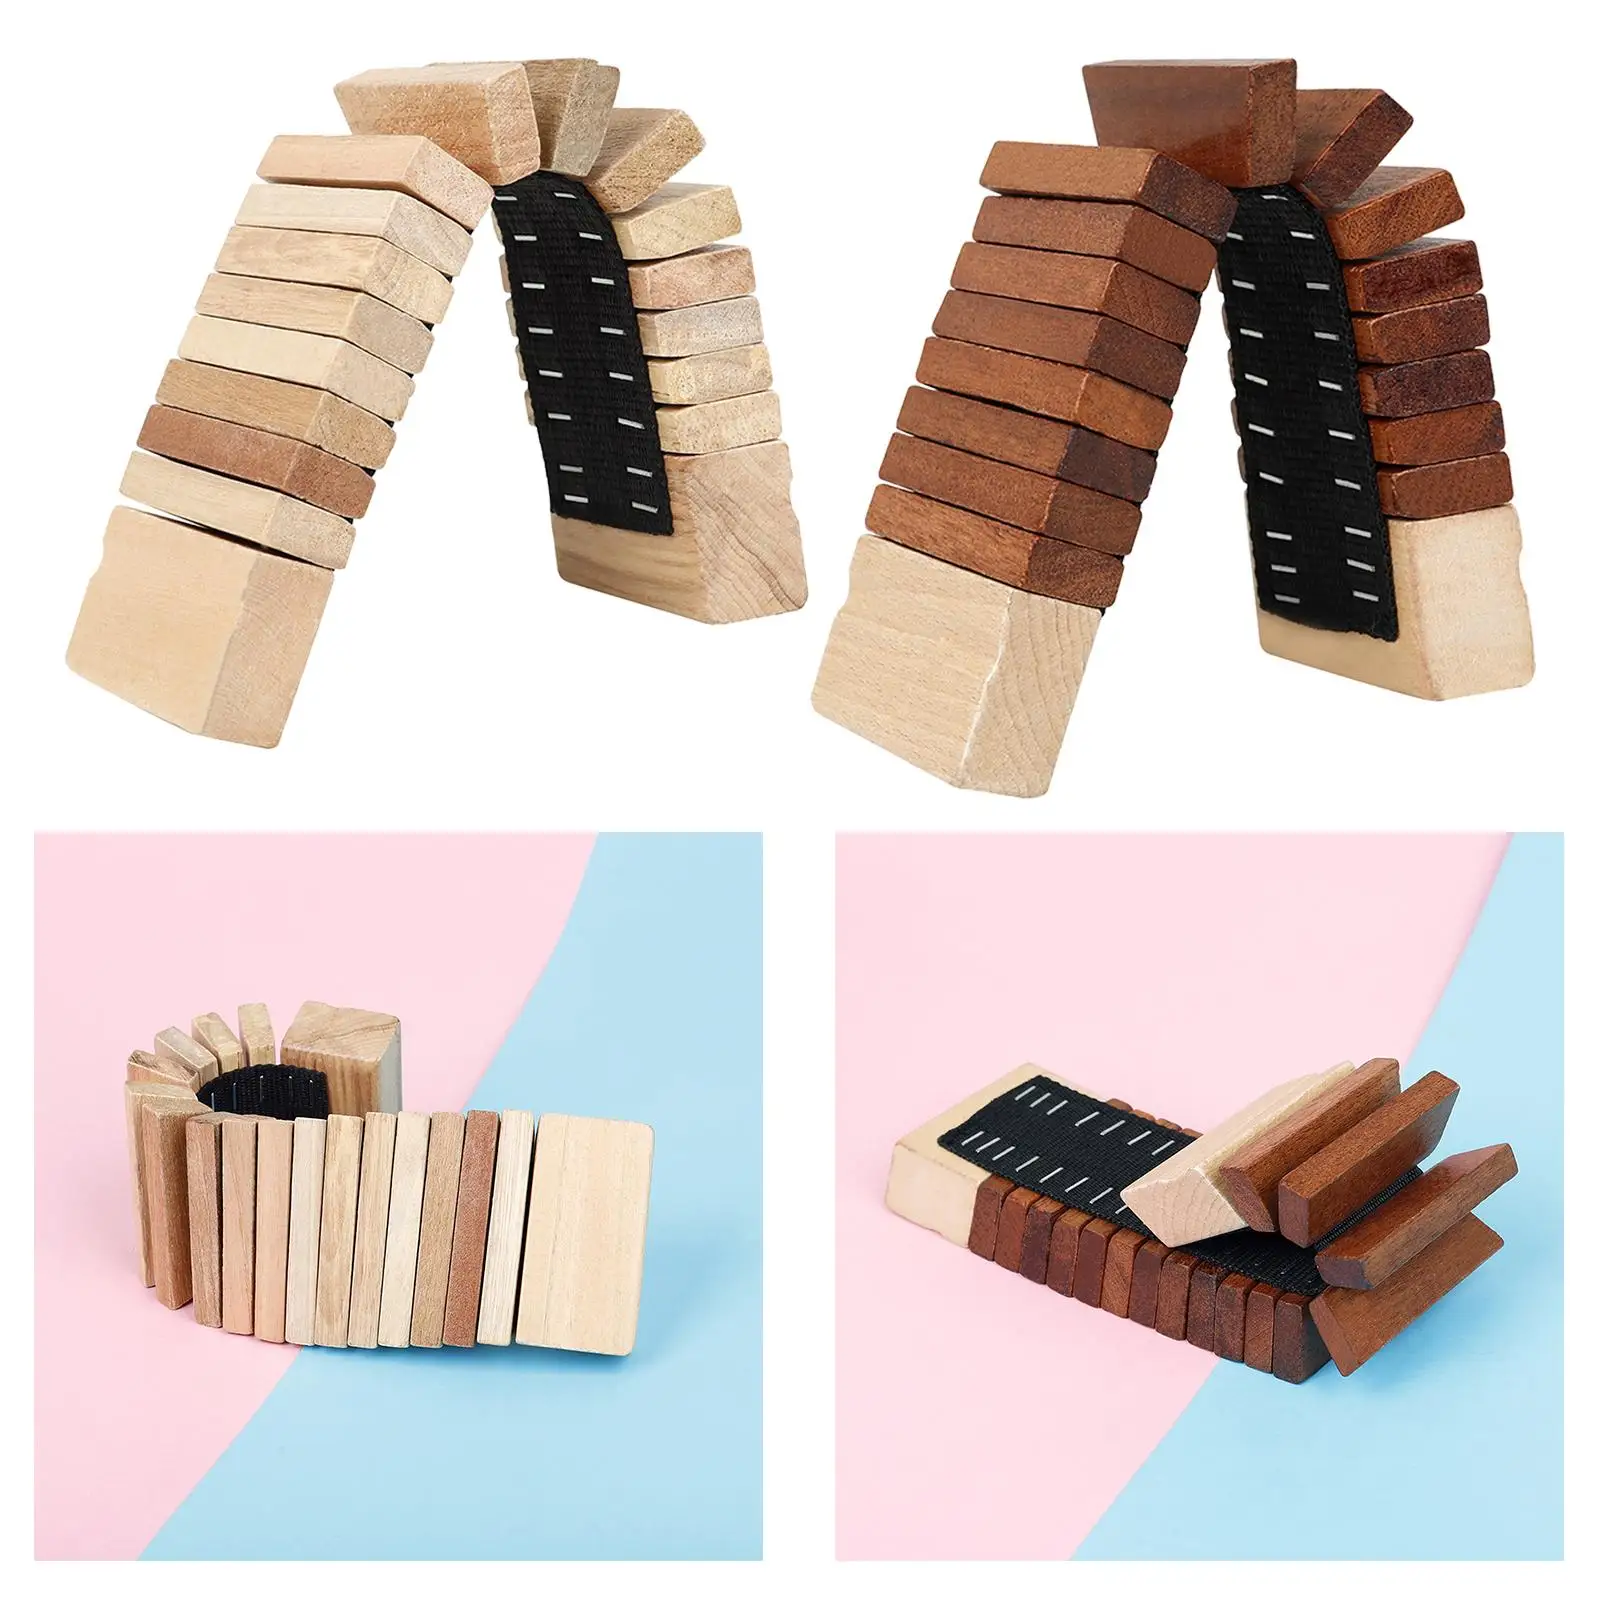 Wooden Castanets Clapper Shaker Preschool Learning Education Toy Musical Toy Clatter Percussion Instrument for Preschool Kids